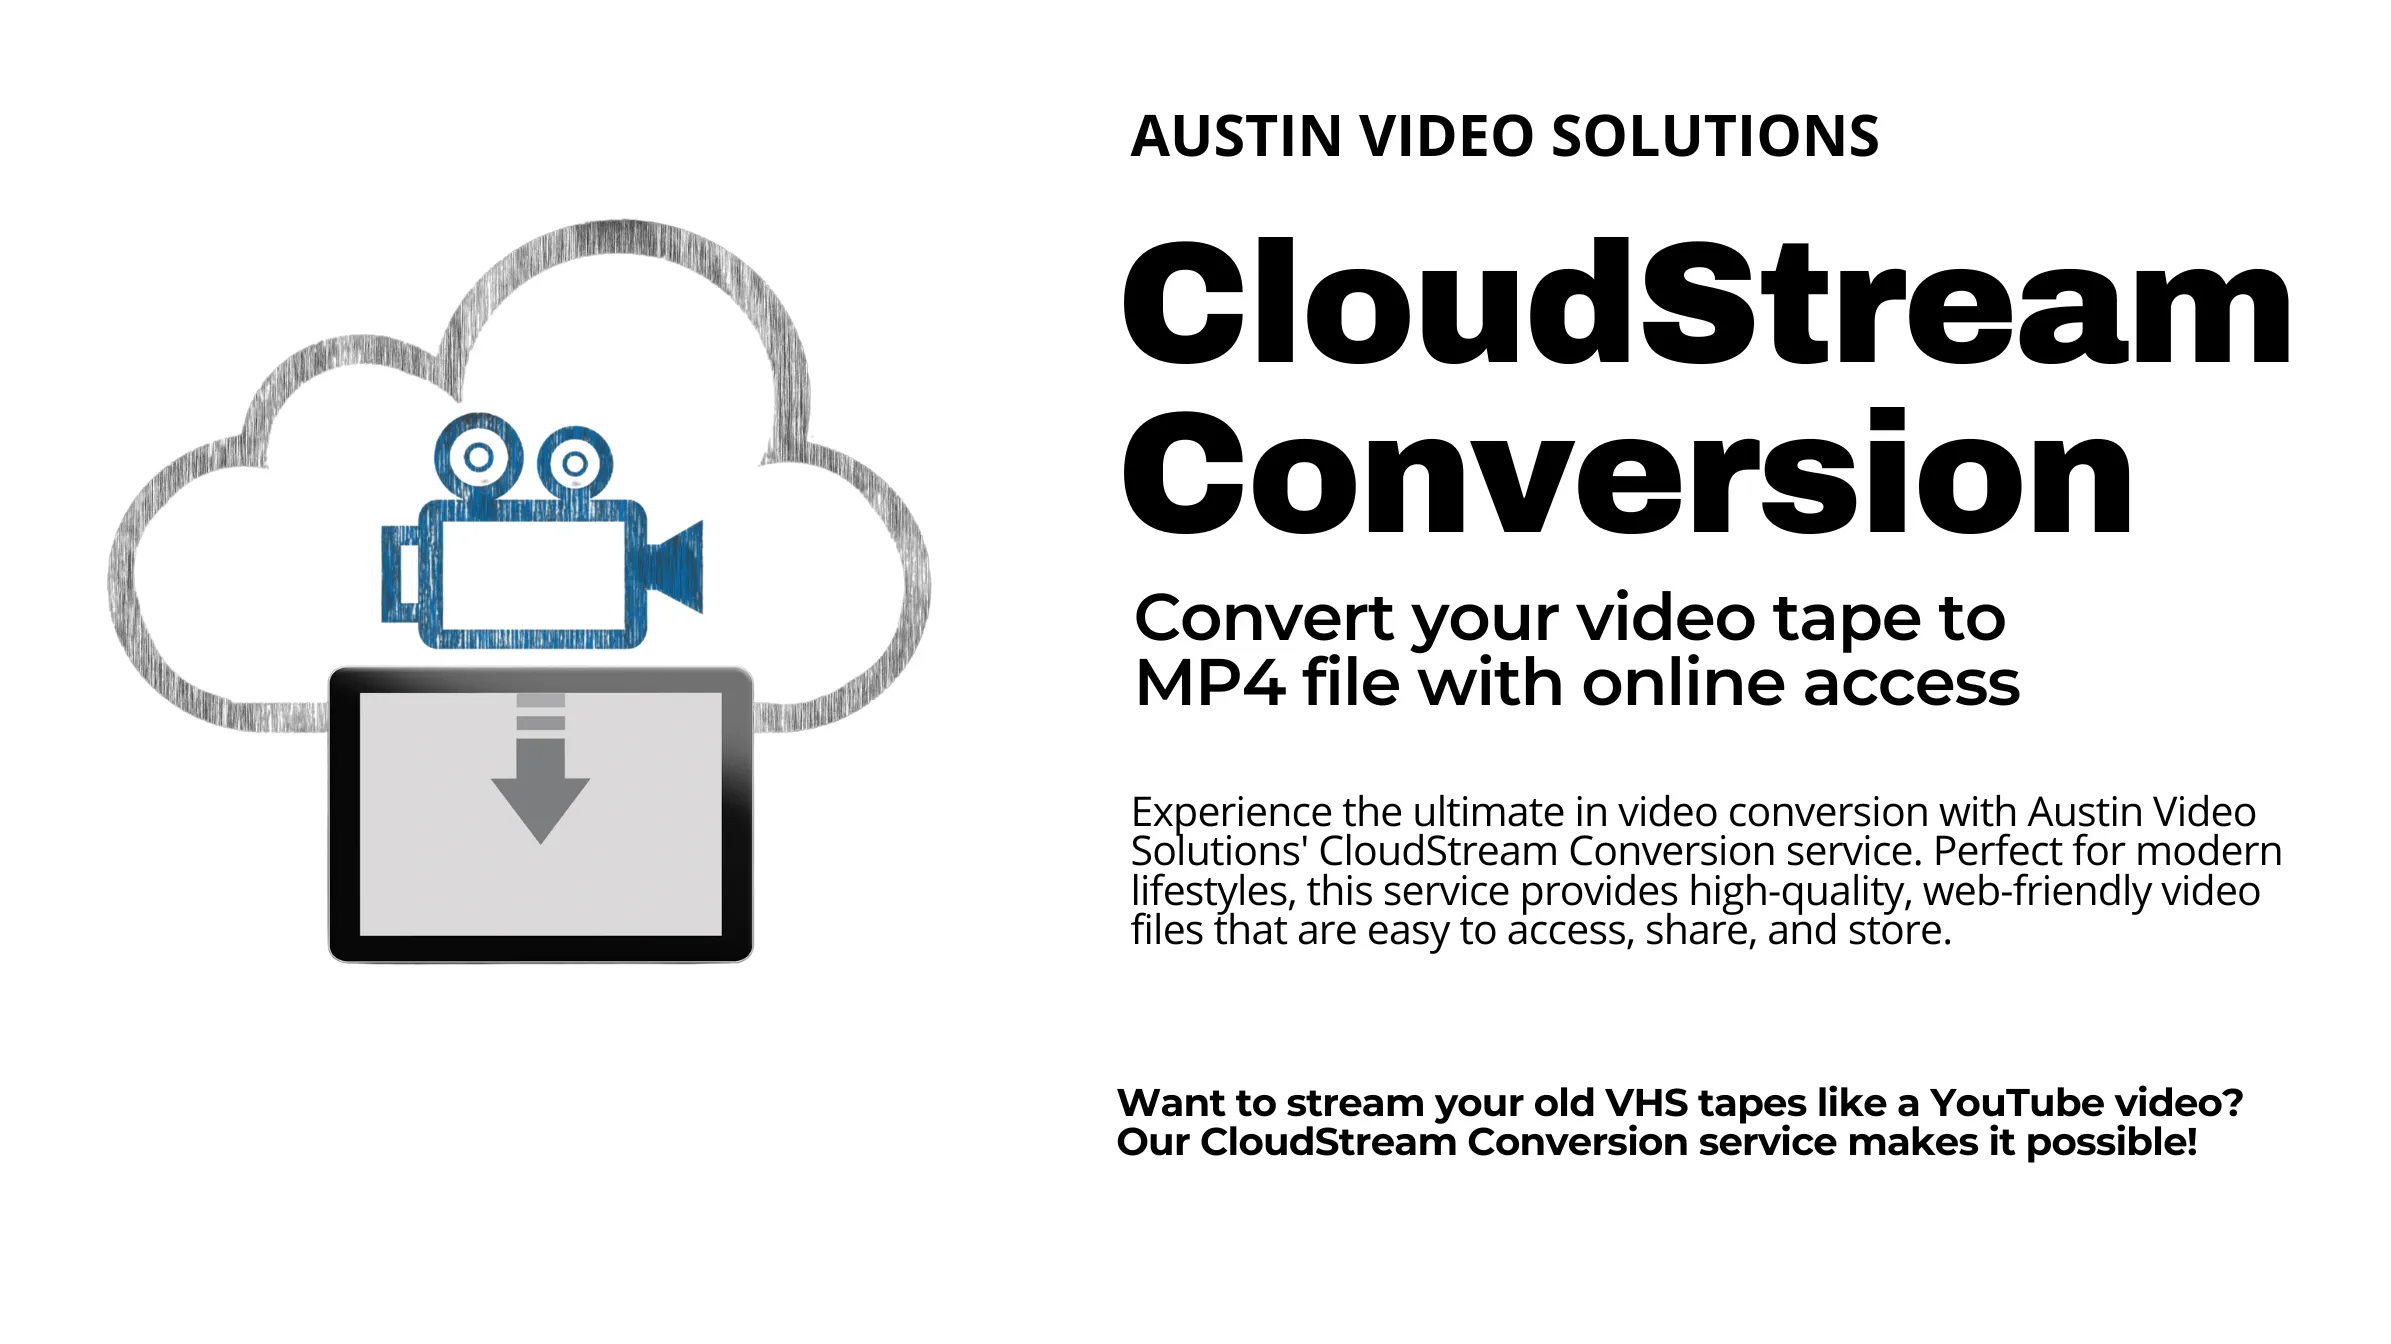 Austin Video Solutions offers professional video editing and post-production services, specializing in videotape conversion.